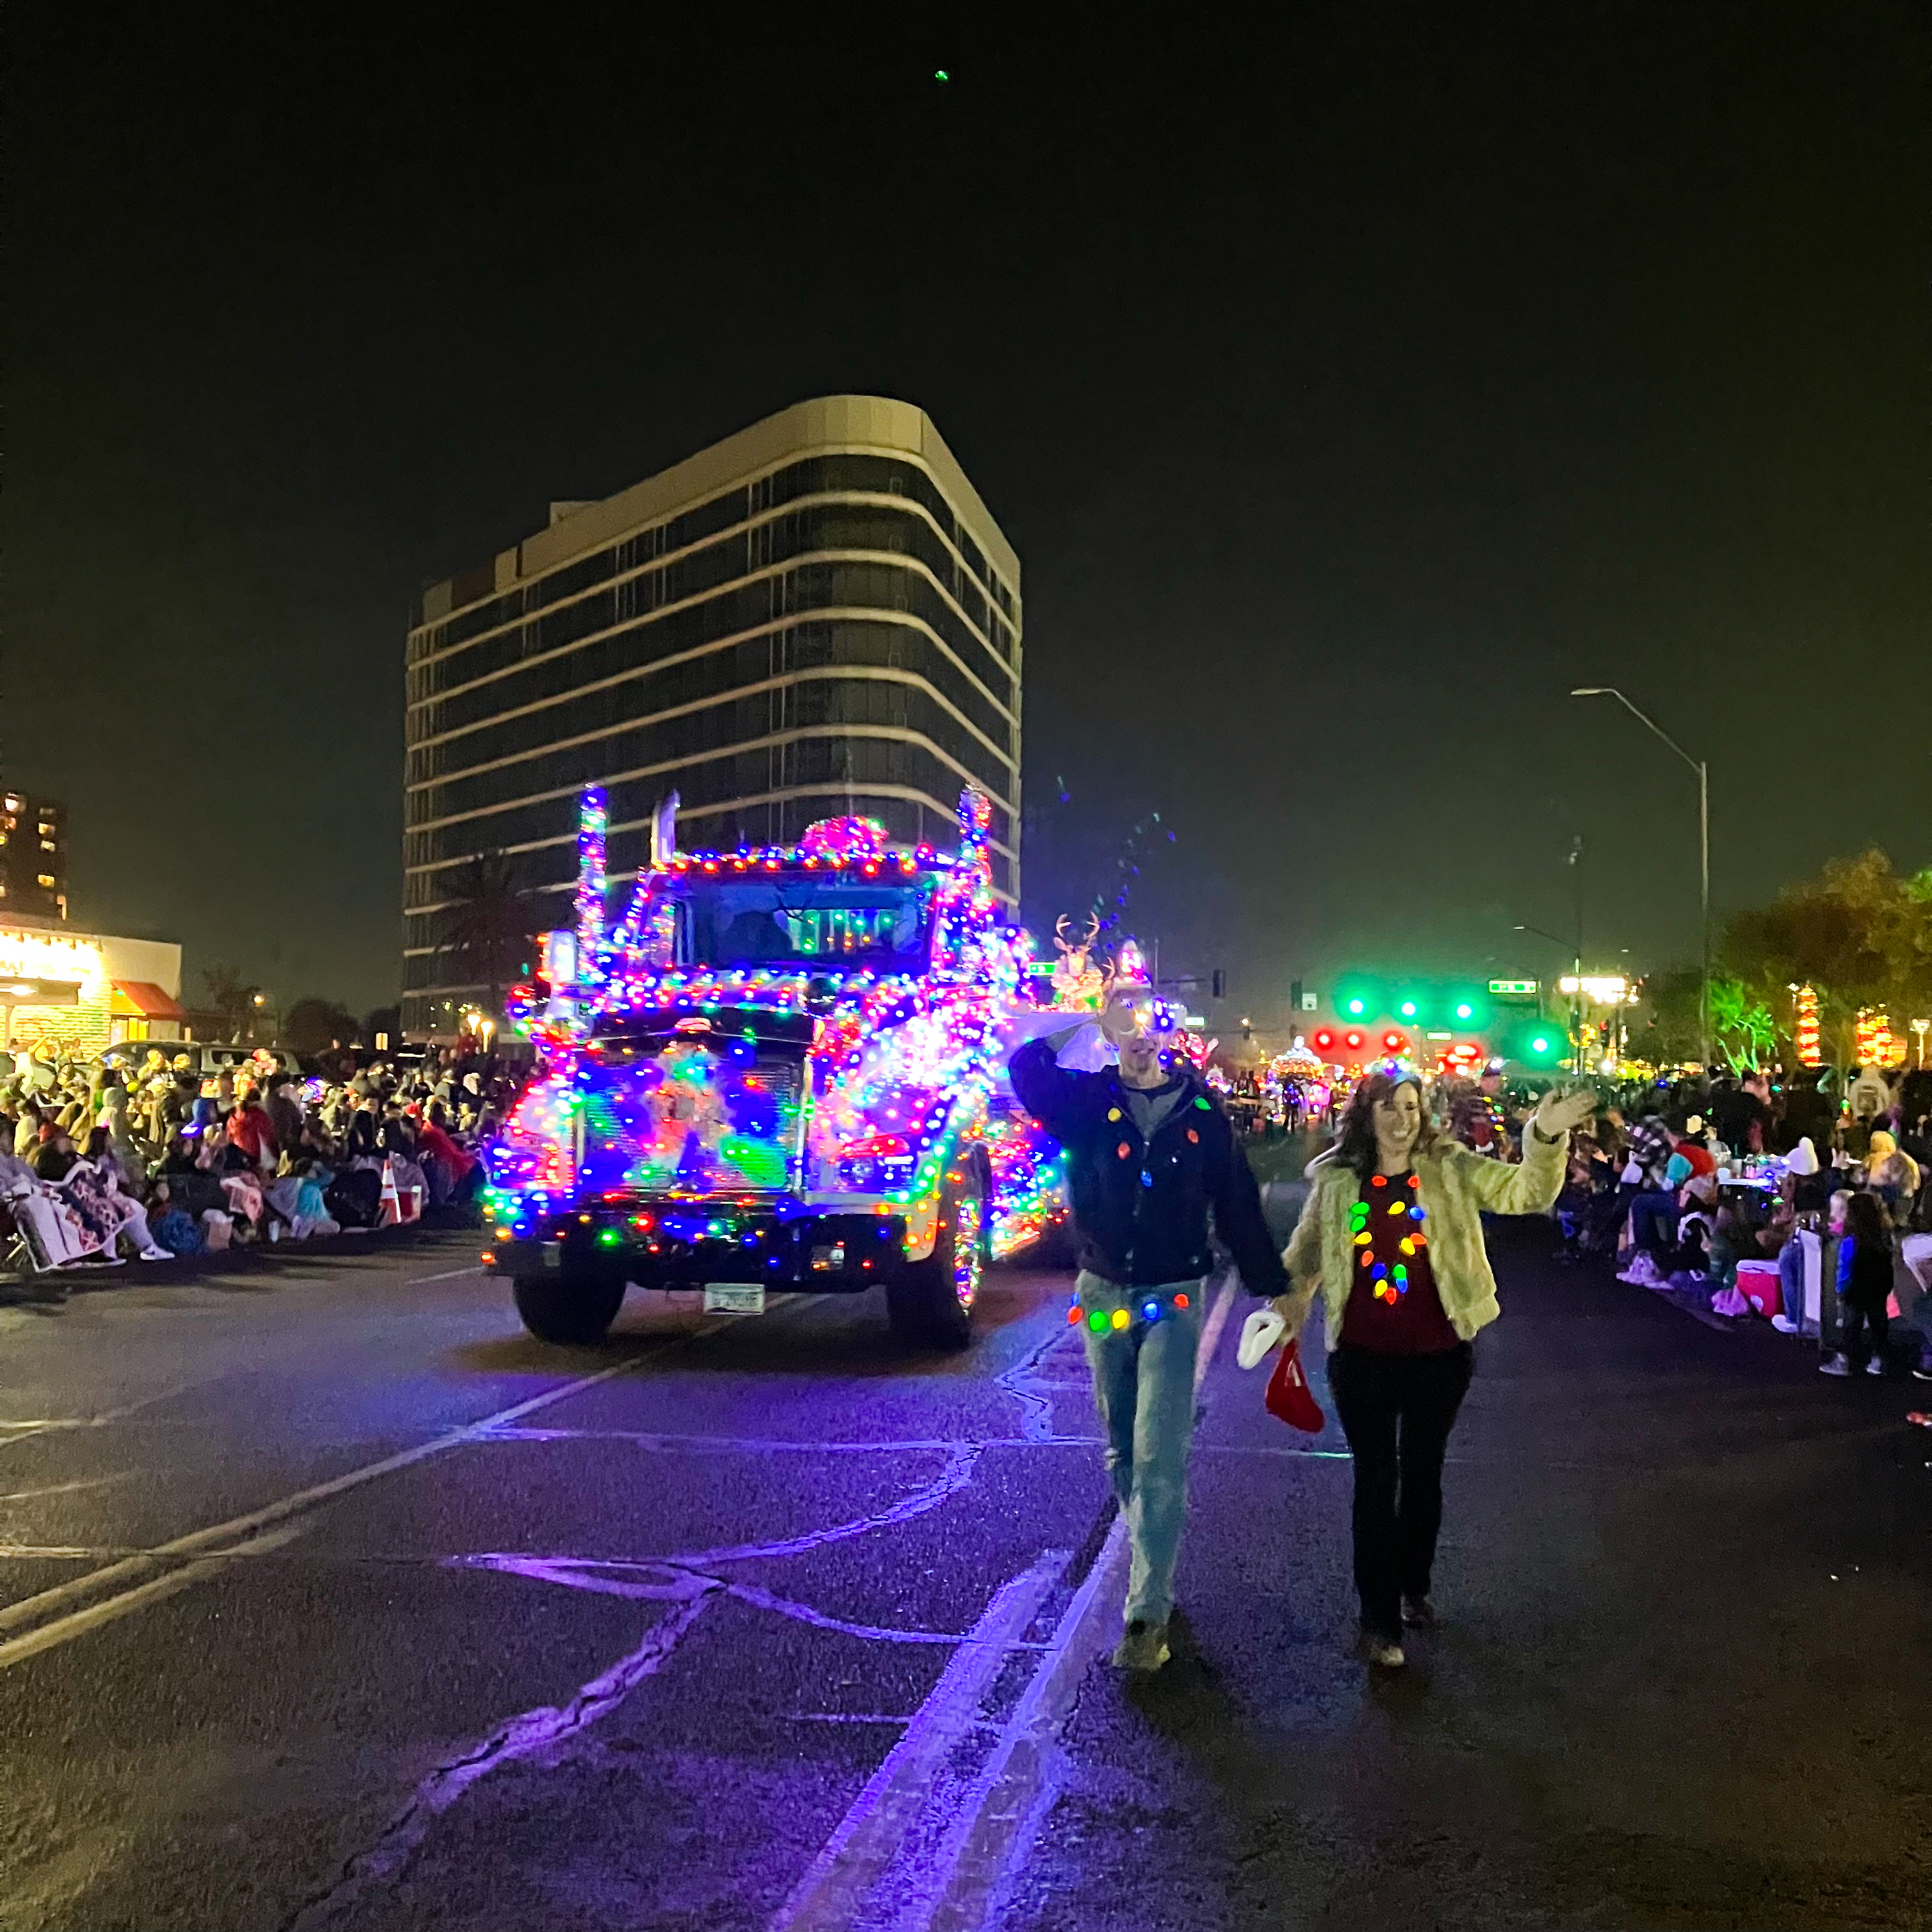 Two ADOT volunteers walking down the street in front of a semi truck decked out in Holiday lights for the Electric Light Parade.